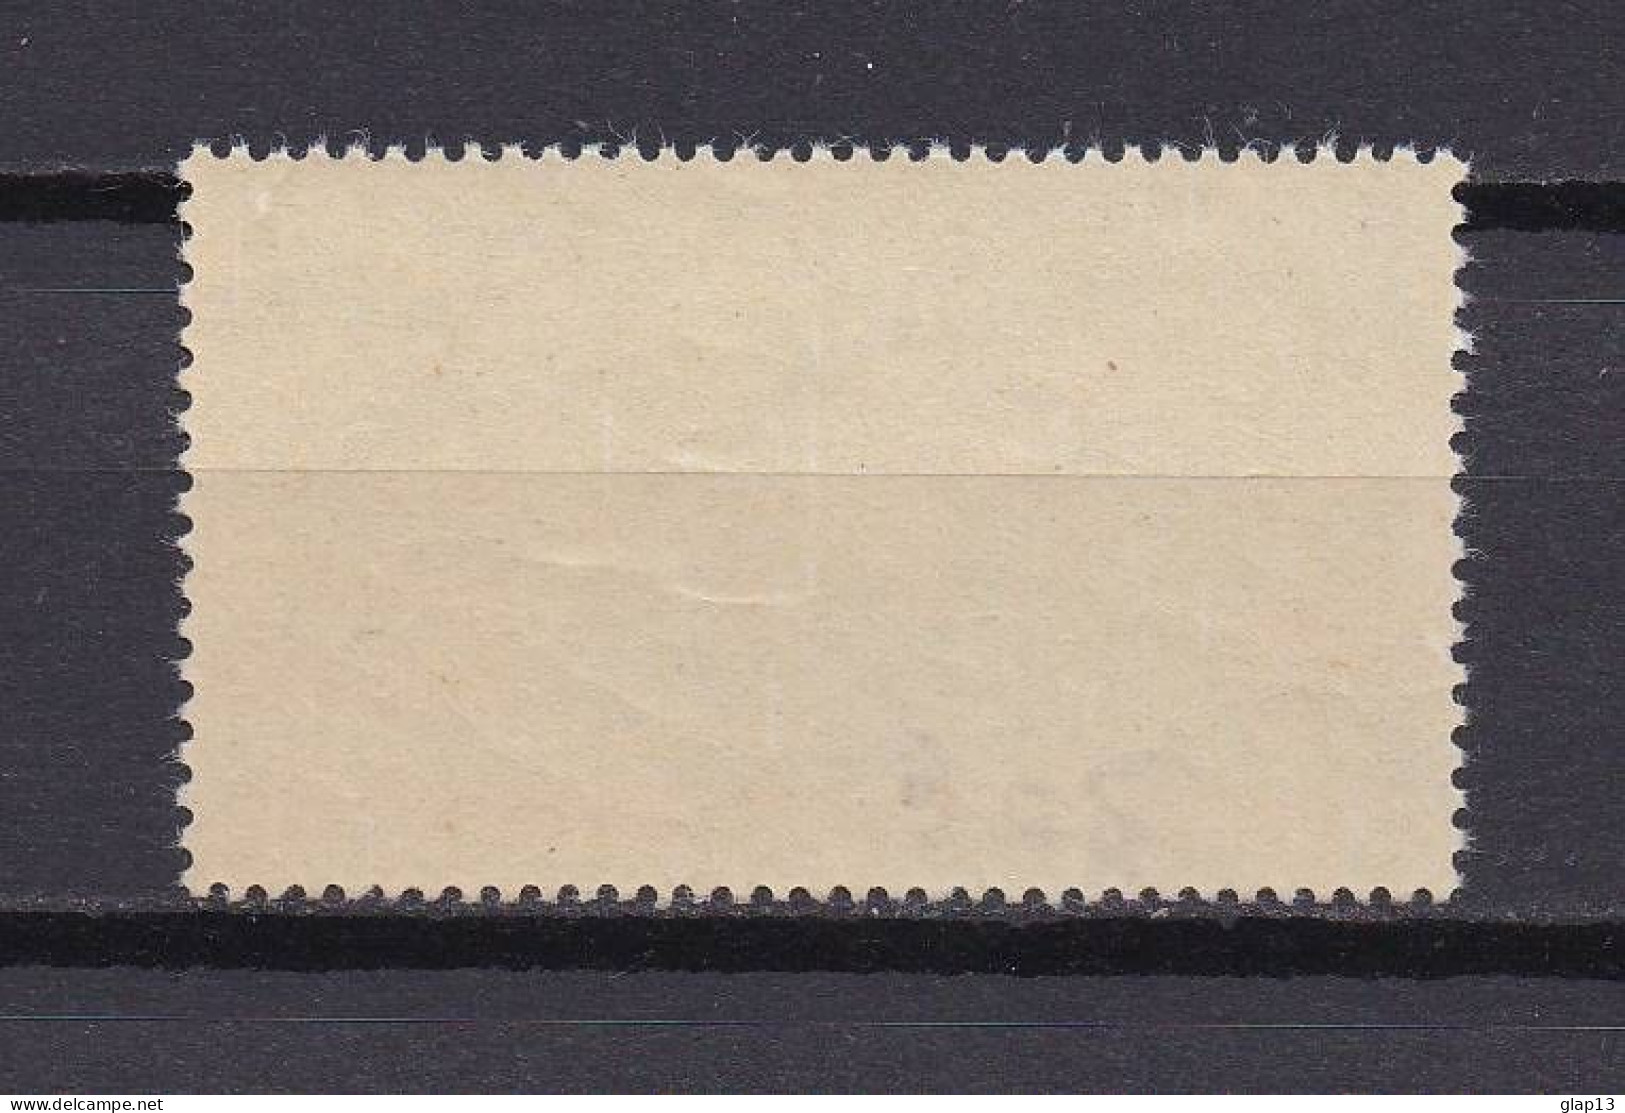 NOUVELLE-CALEDONIE 1962 TIMBRE N°305 NEUF AVEC CHARNIERE CONFERENCE - Ungebraucht